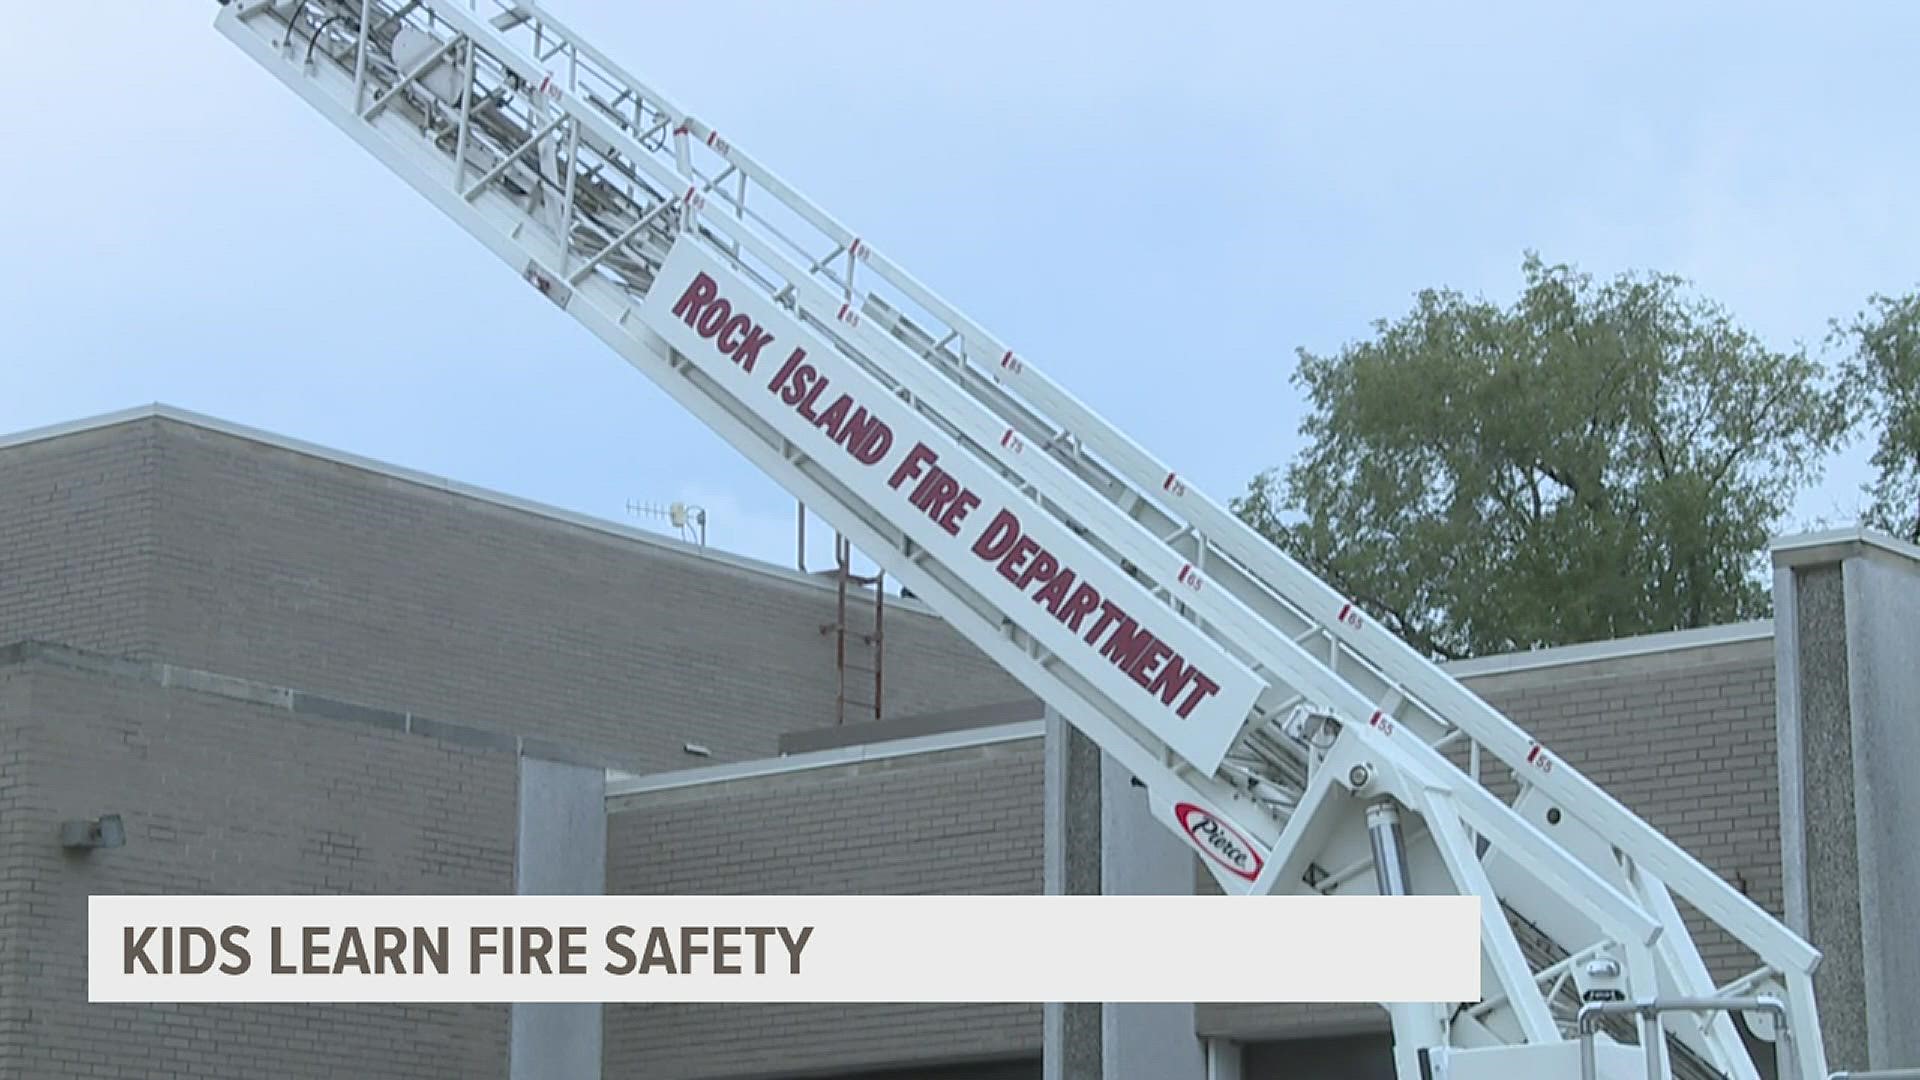 As Fire Prevention Week begins and colder weather approaches, fire officials have plenty of advice to give on how residents, especially kids, can avoid fires.